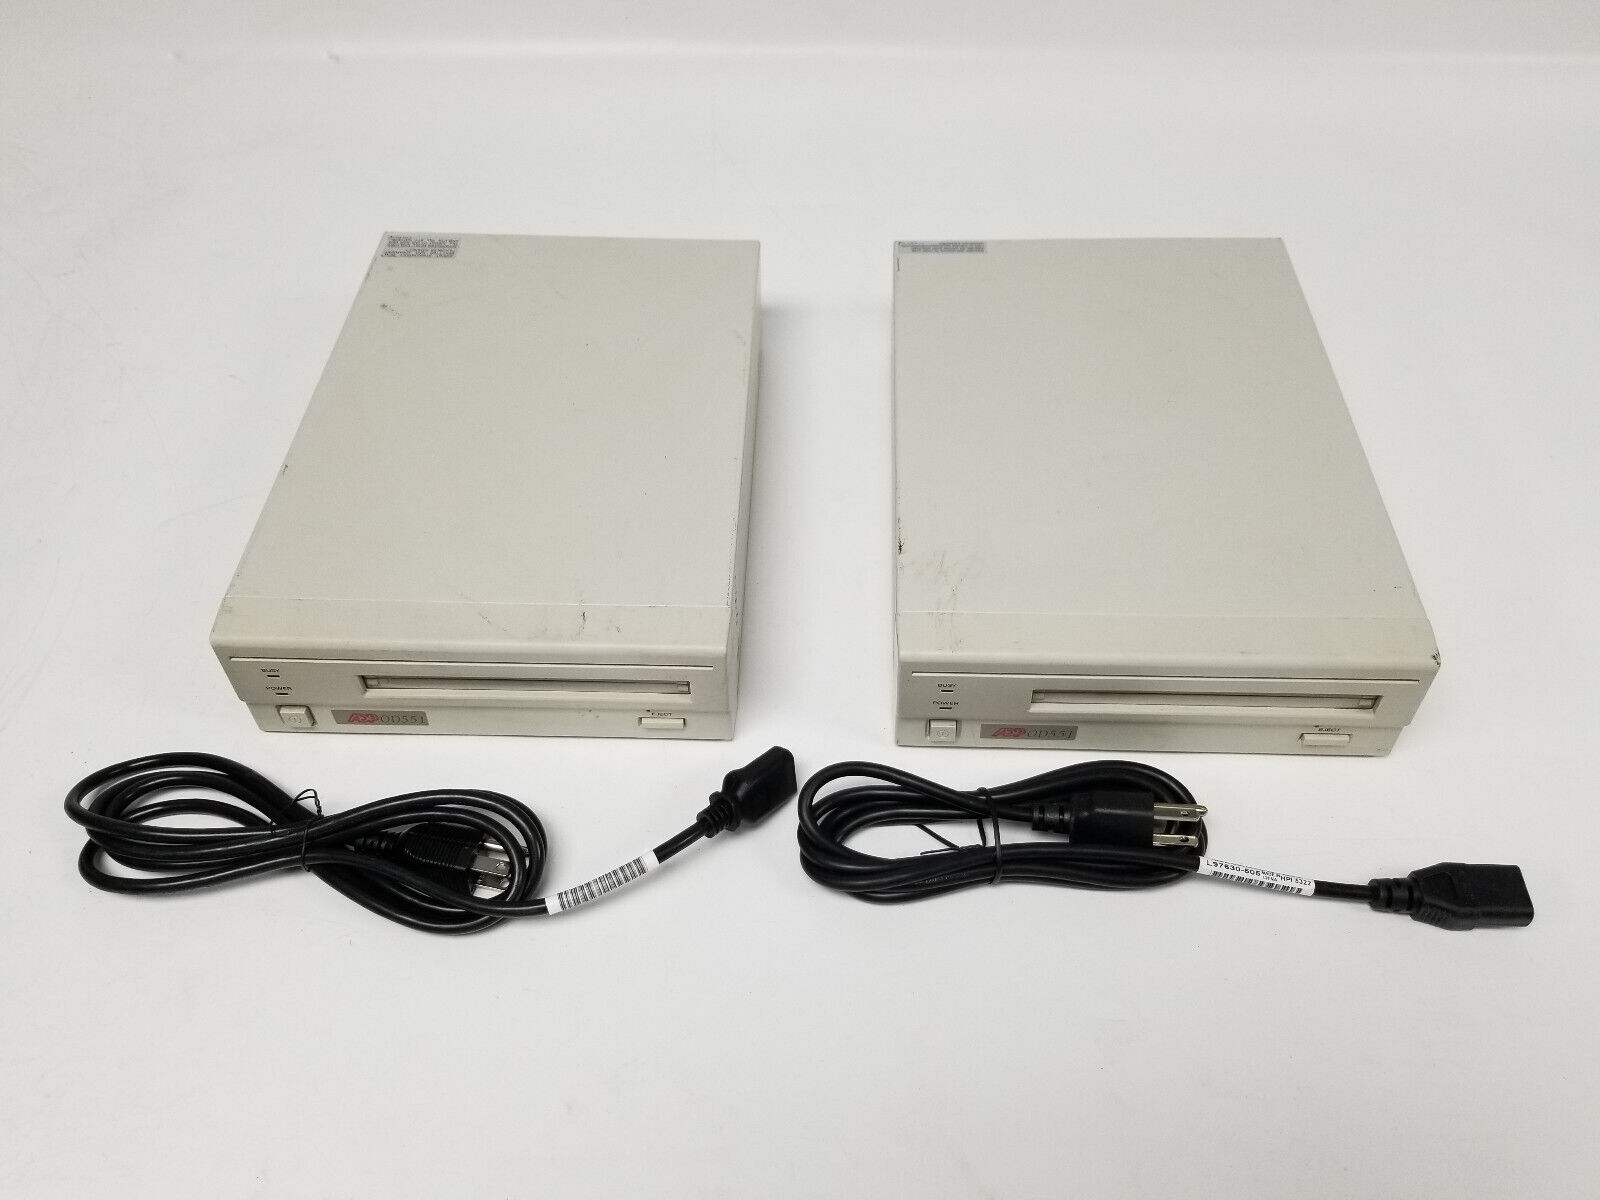 Vintage Lot of 2 Sony SMO-S551 External Magneto Optical Drives for 130mm/5.25\